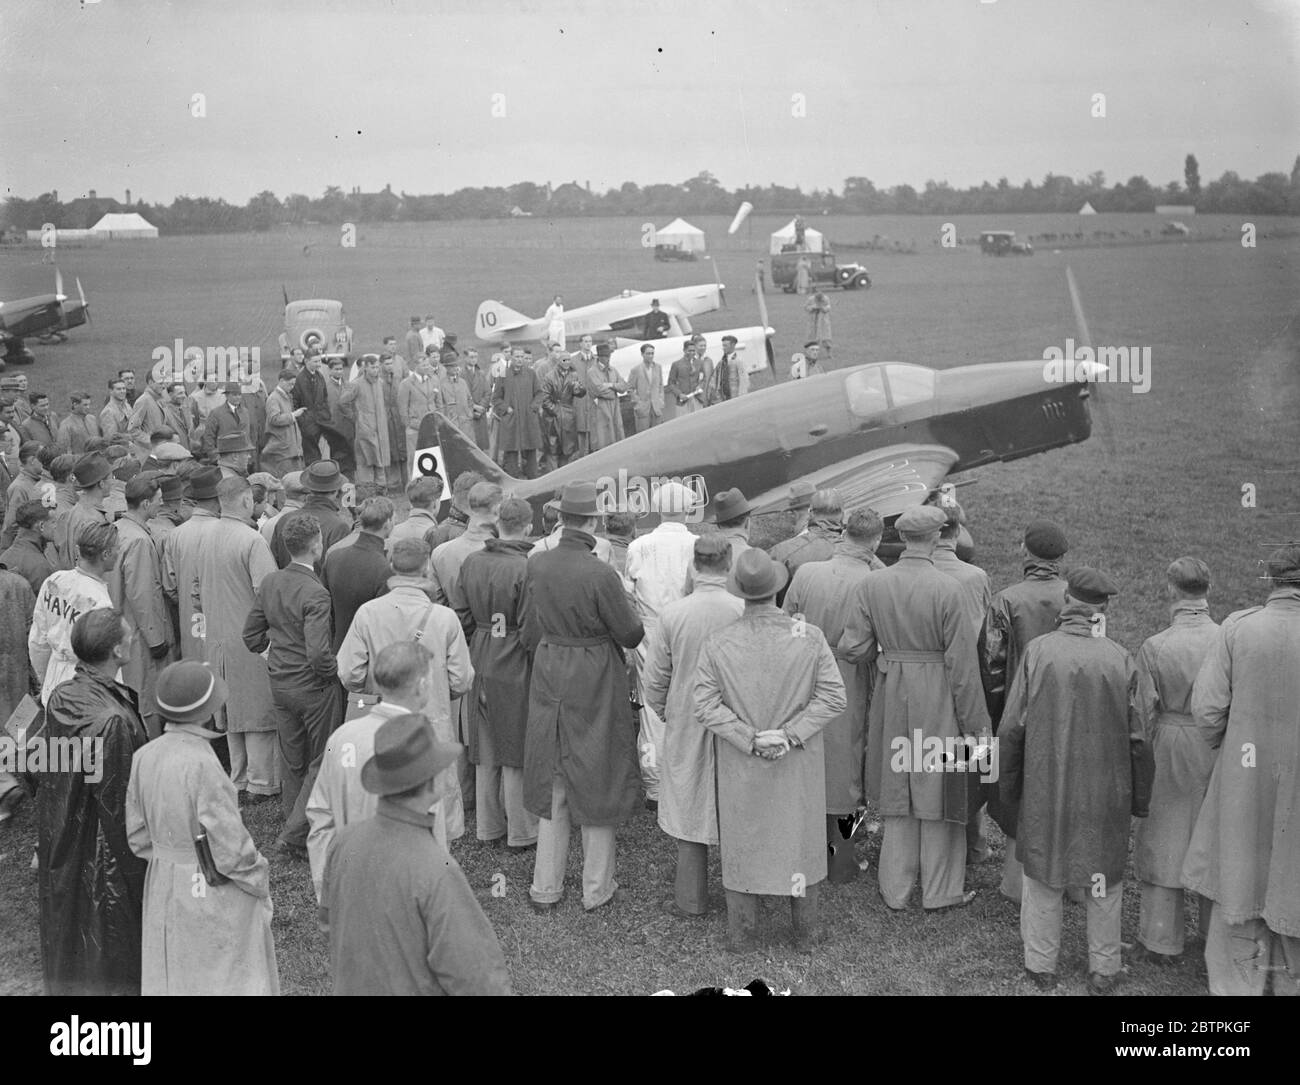 Lord Wakefield ' s plane starts in King ' s Cup air race . The King ' s Cup air race started from Hatfield Aerodrome . There are 28 entries . The first of the two days of the contest takes the form of elimination in a race over two circuits of a course of 612 miles , making 1 , 224 miles in all . Fifty per cent of the starters in each of the three groups of aircraft will pass into the final . Final shows, Lord Wakefield ' s T K2 piloted by R J Waight starting . 10 July 1936 Stock Photo